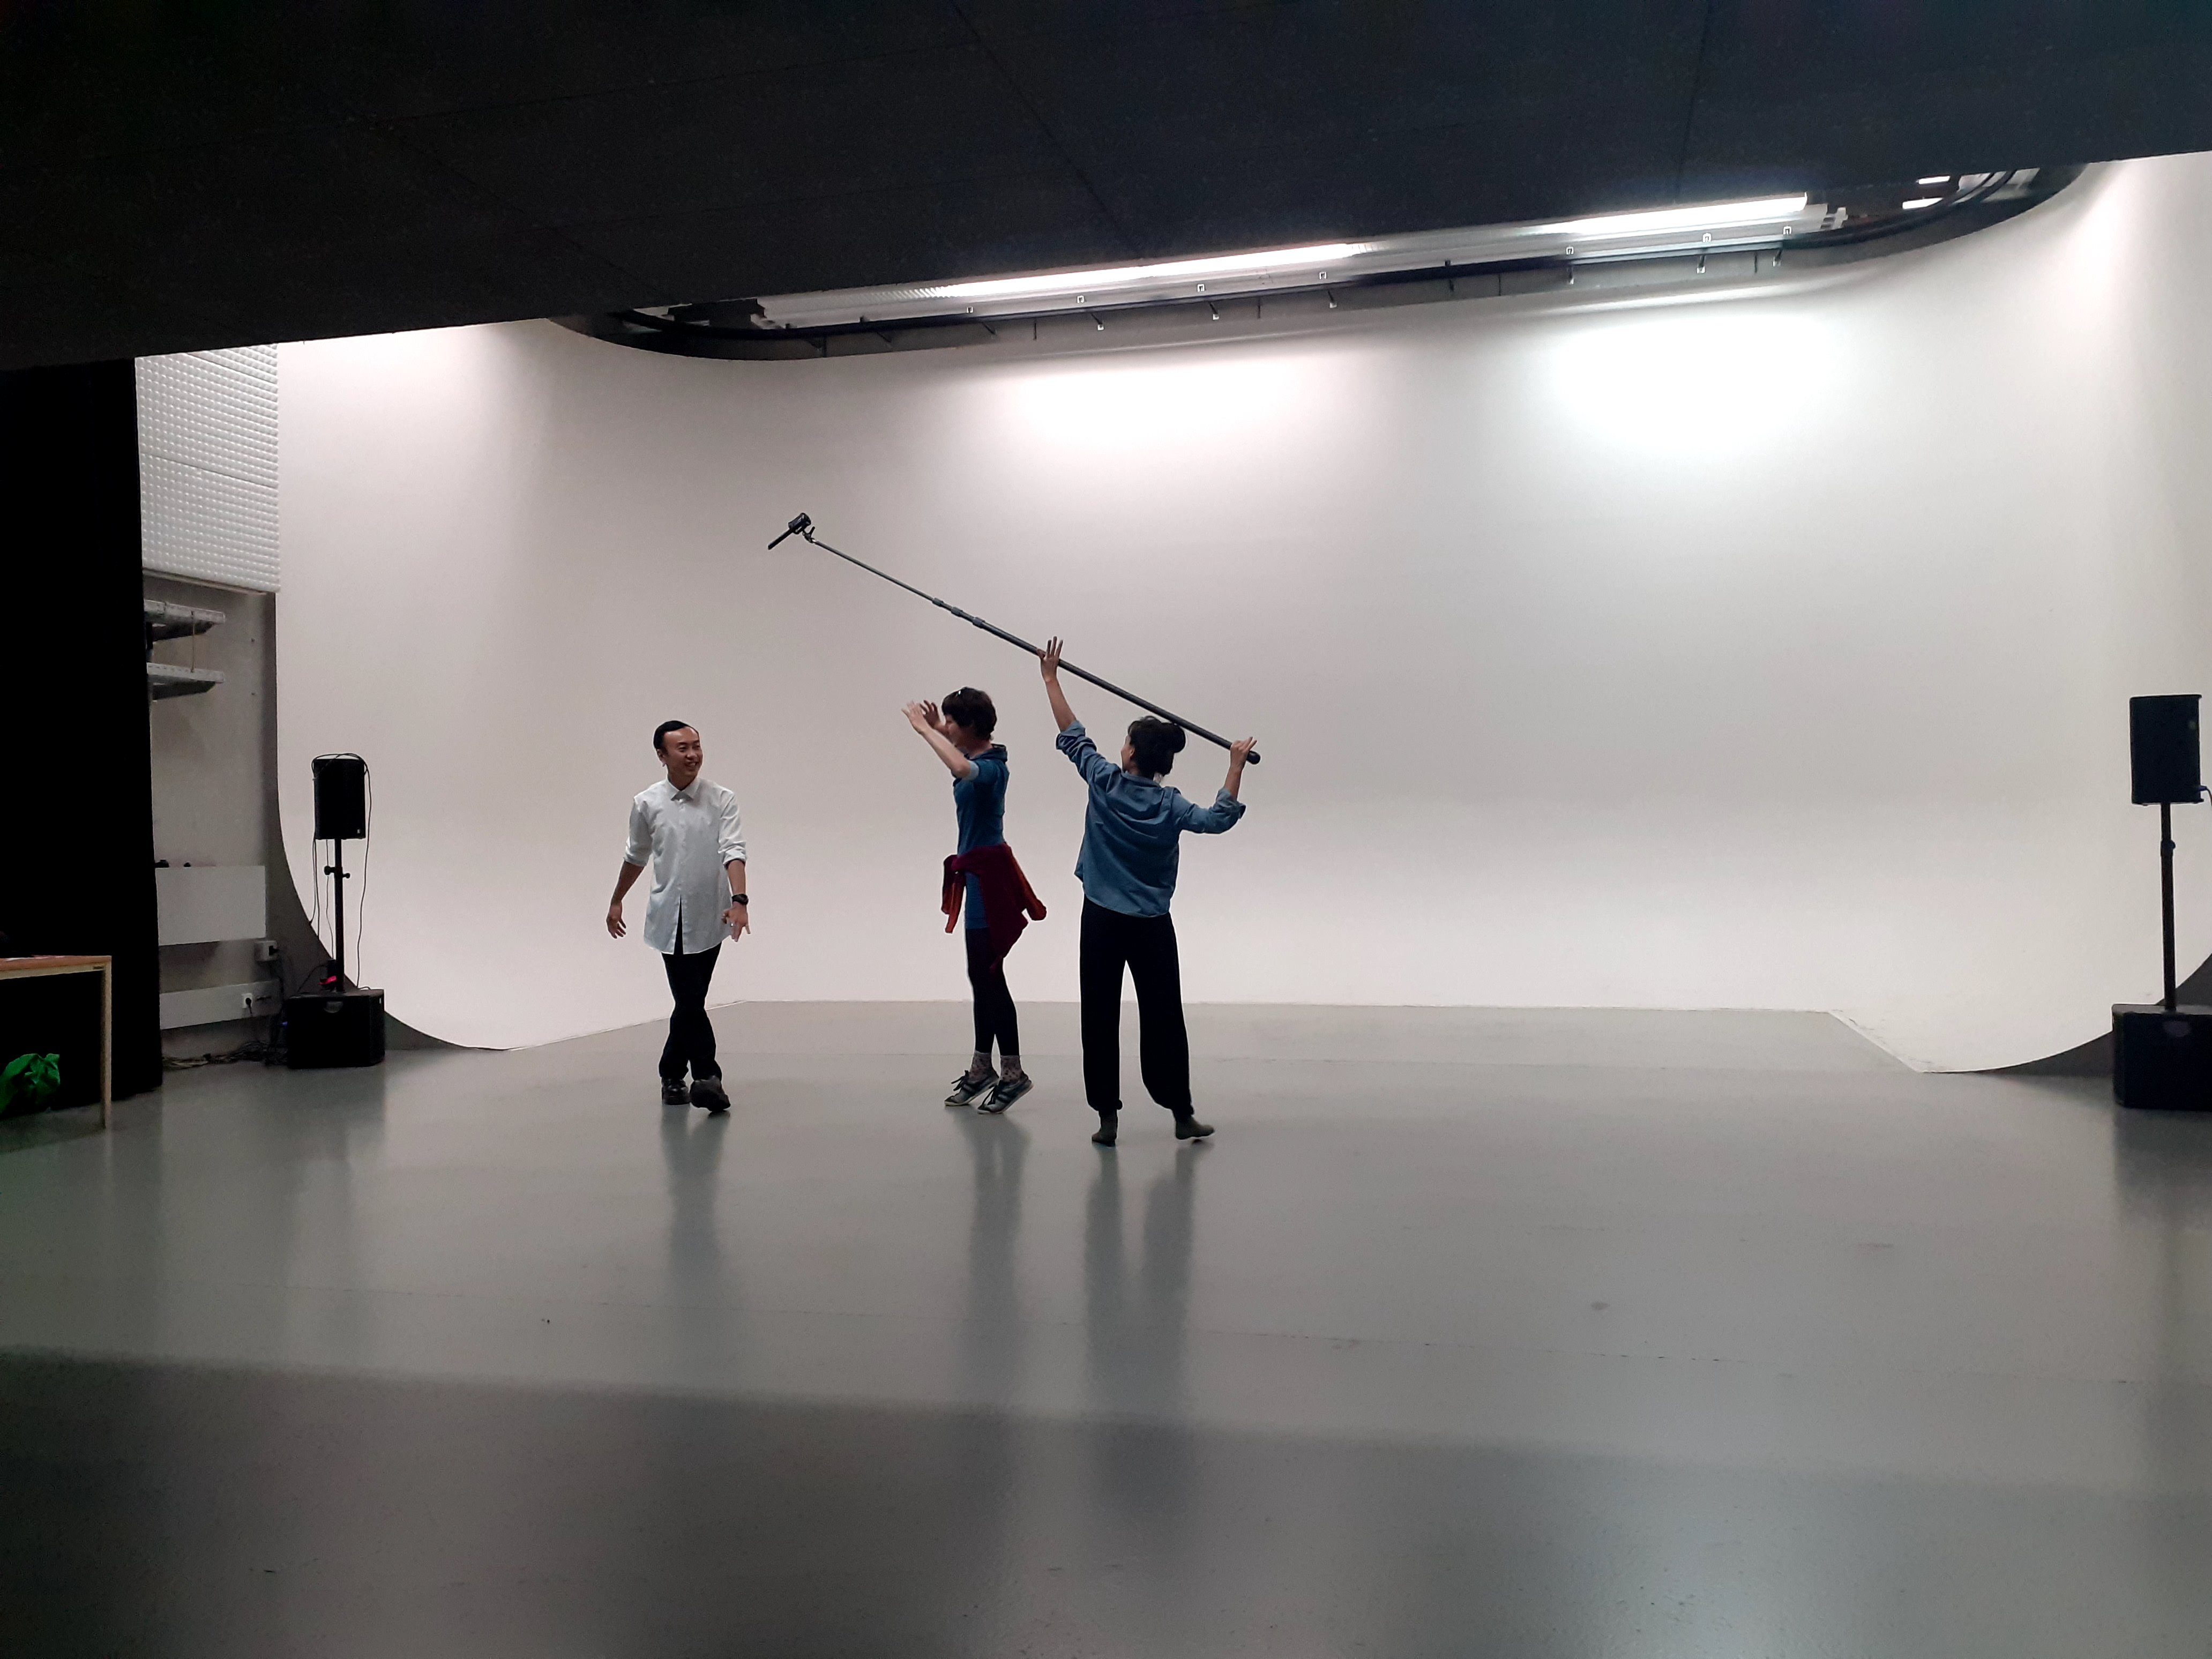 Kai is filmed by Hanne during the Boom experimentation Lab in Vienna on Third of September 21